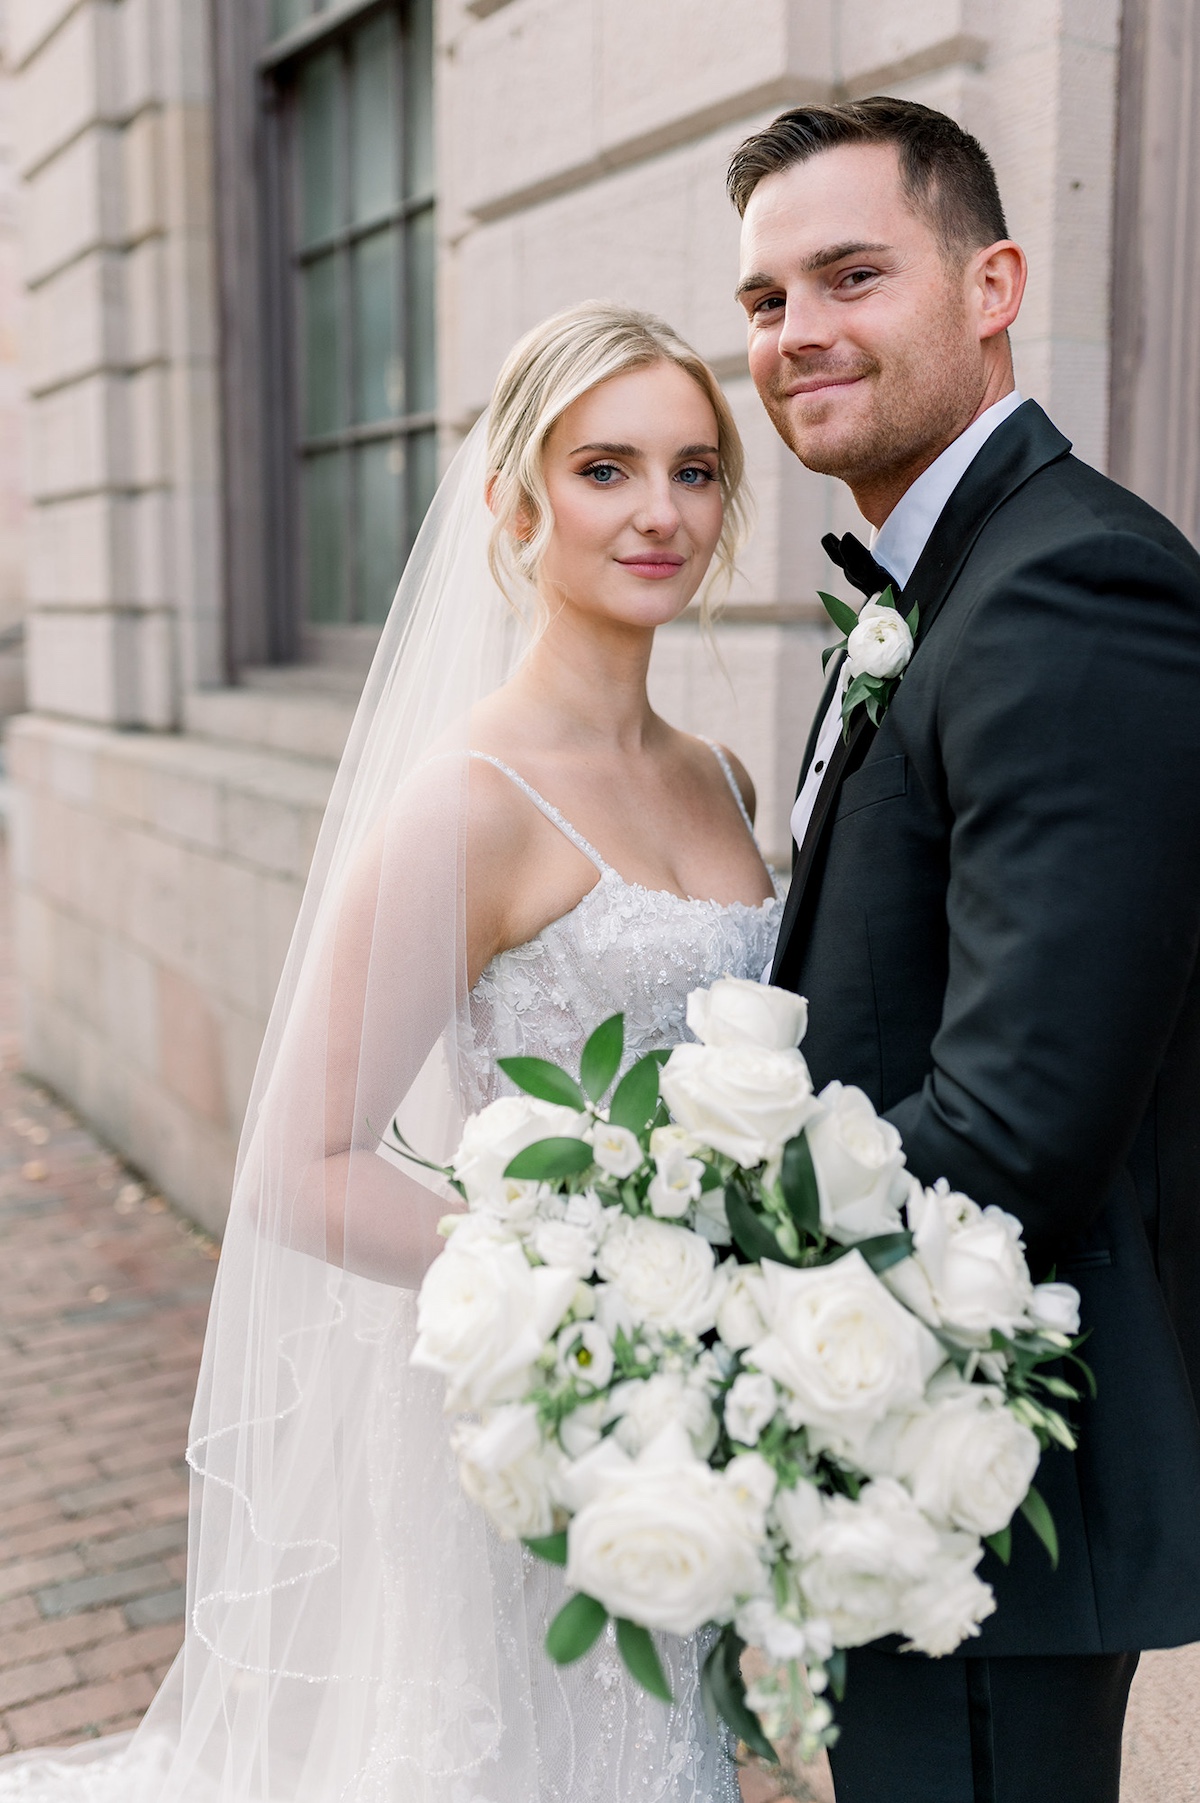 Embracing against classic architecture, the bride and groom showcase their high-end connection in a portrait capturing timeless romance in Lancaster City.